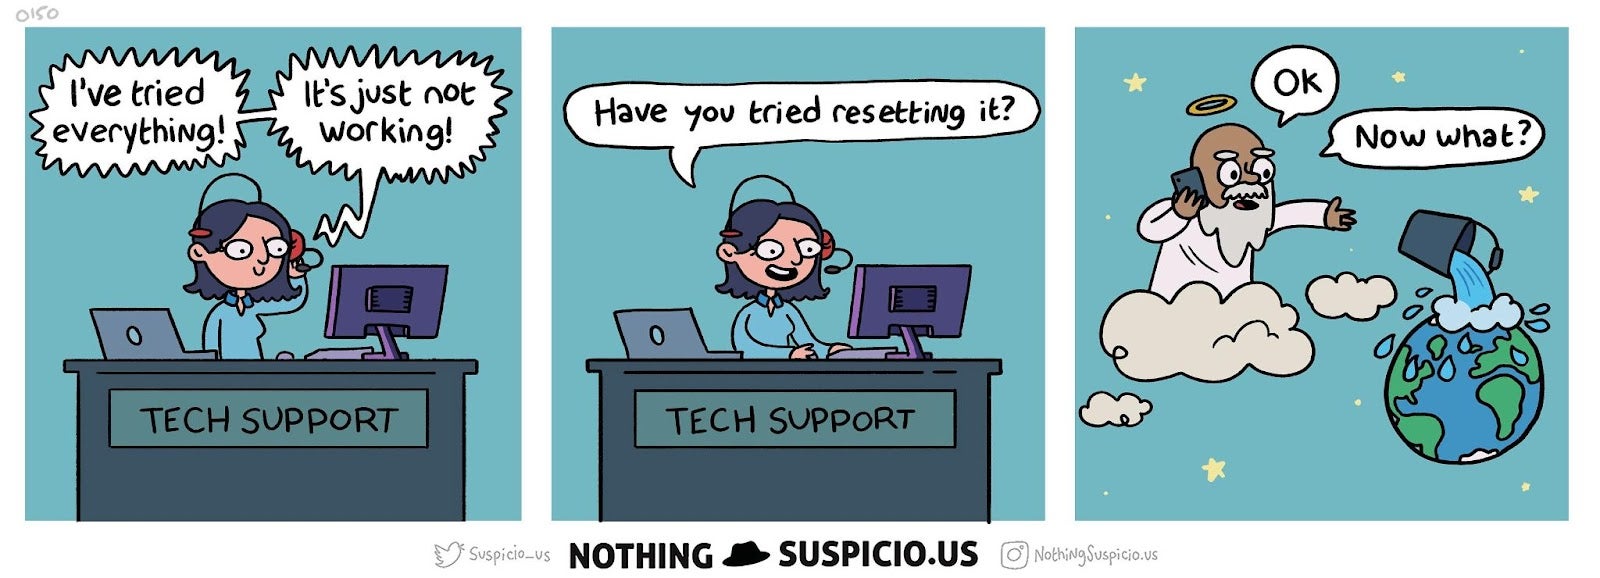 Comic strip showing Tech Support suggestion a reset of the earth